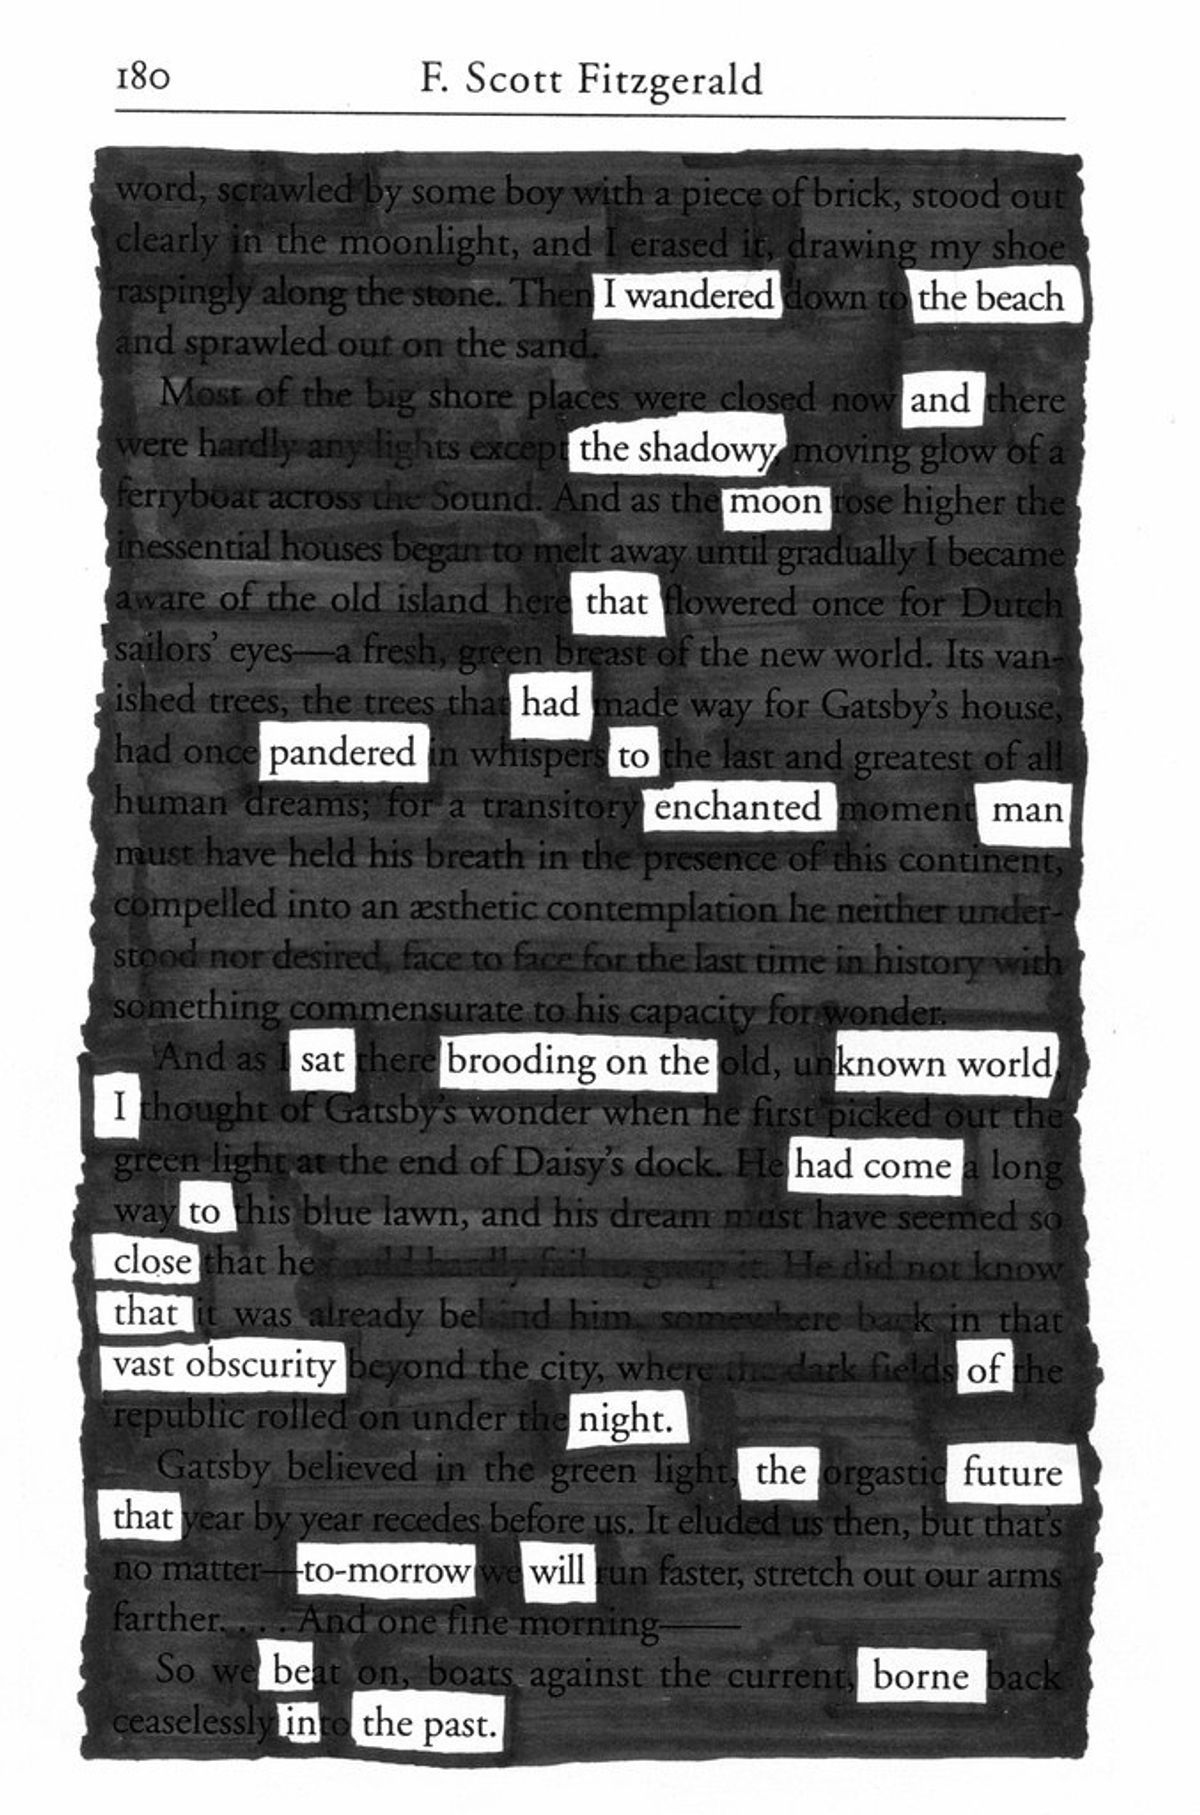 8 Blackout Poems From Voltaire's "Candide"